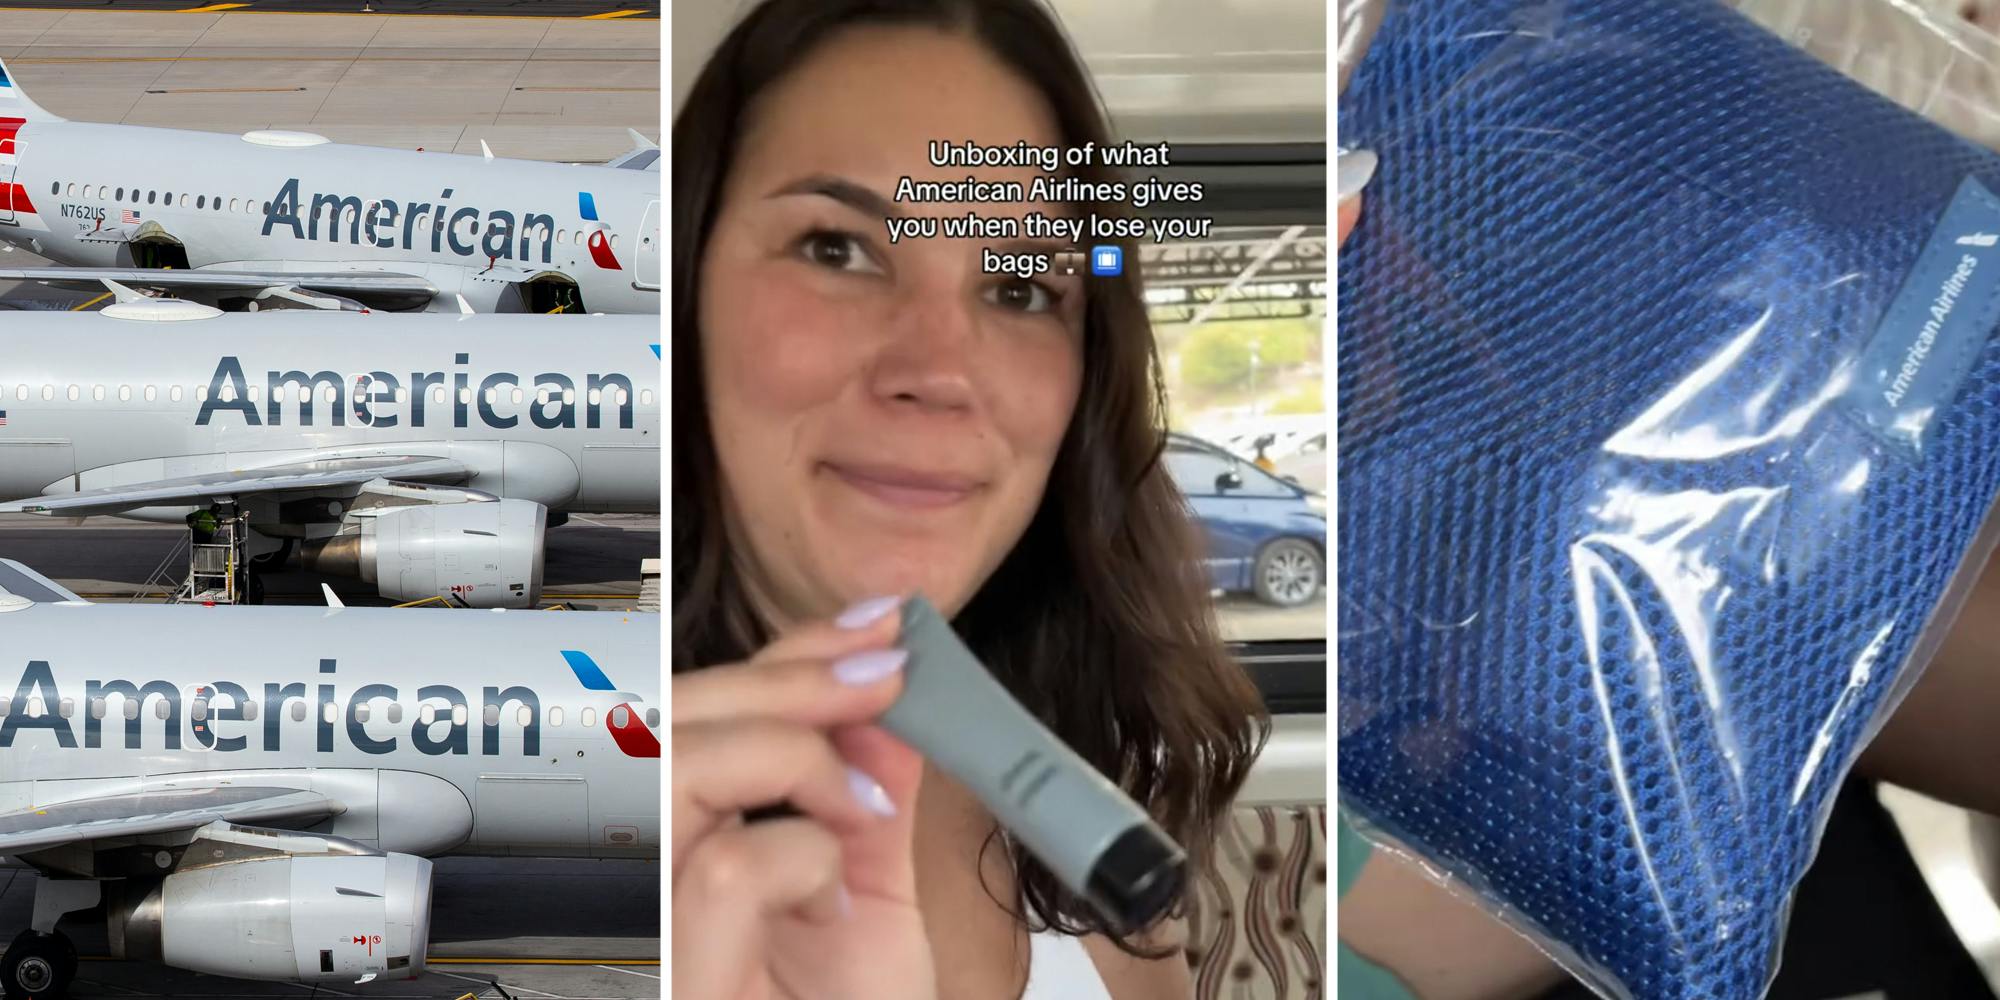 ‘This is all stuff you would have in your carry on anyway’: American Airlines customer unboxes bag airline gives you if they lose your checked luggage